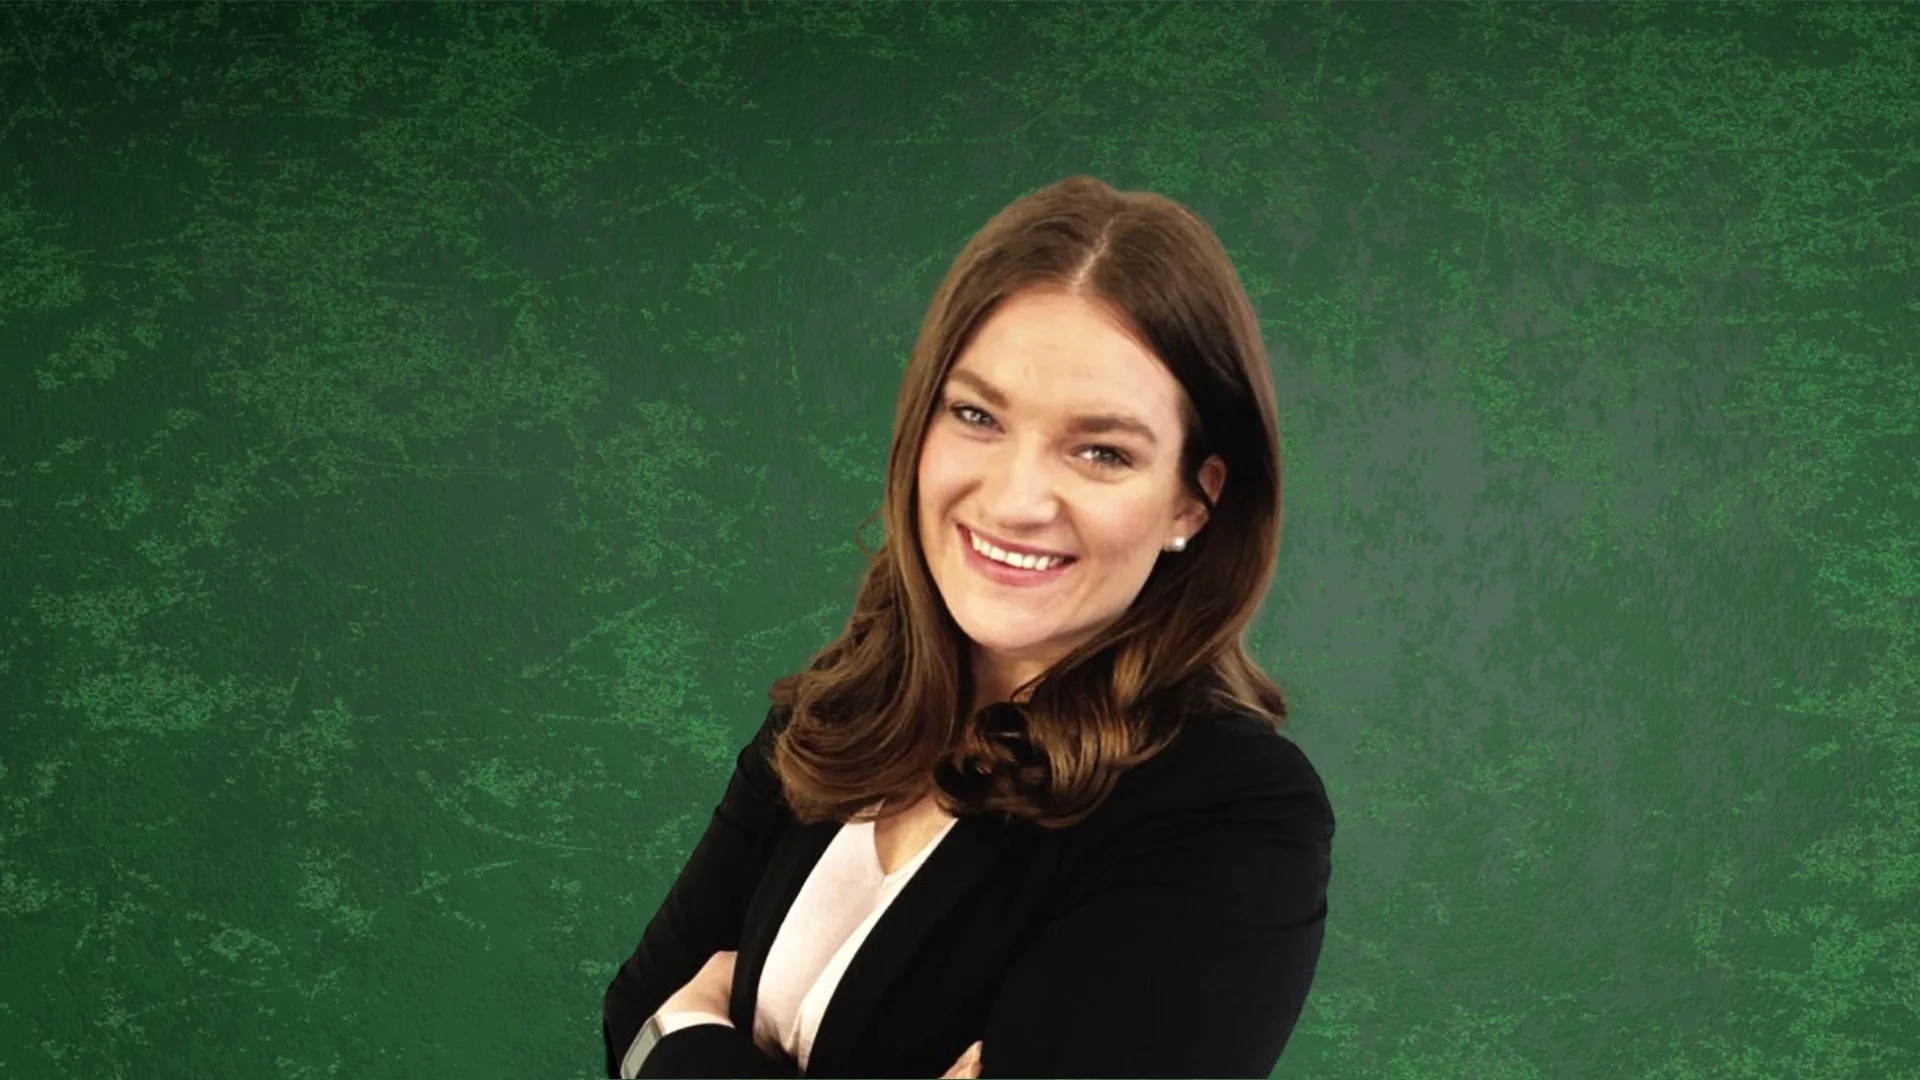 The Greenhouse Welcomes Mackenzie Brimm as Marketing & Content Strategist